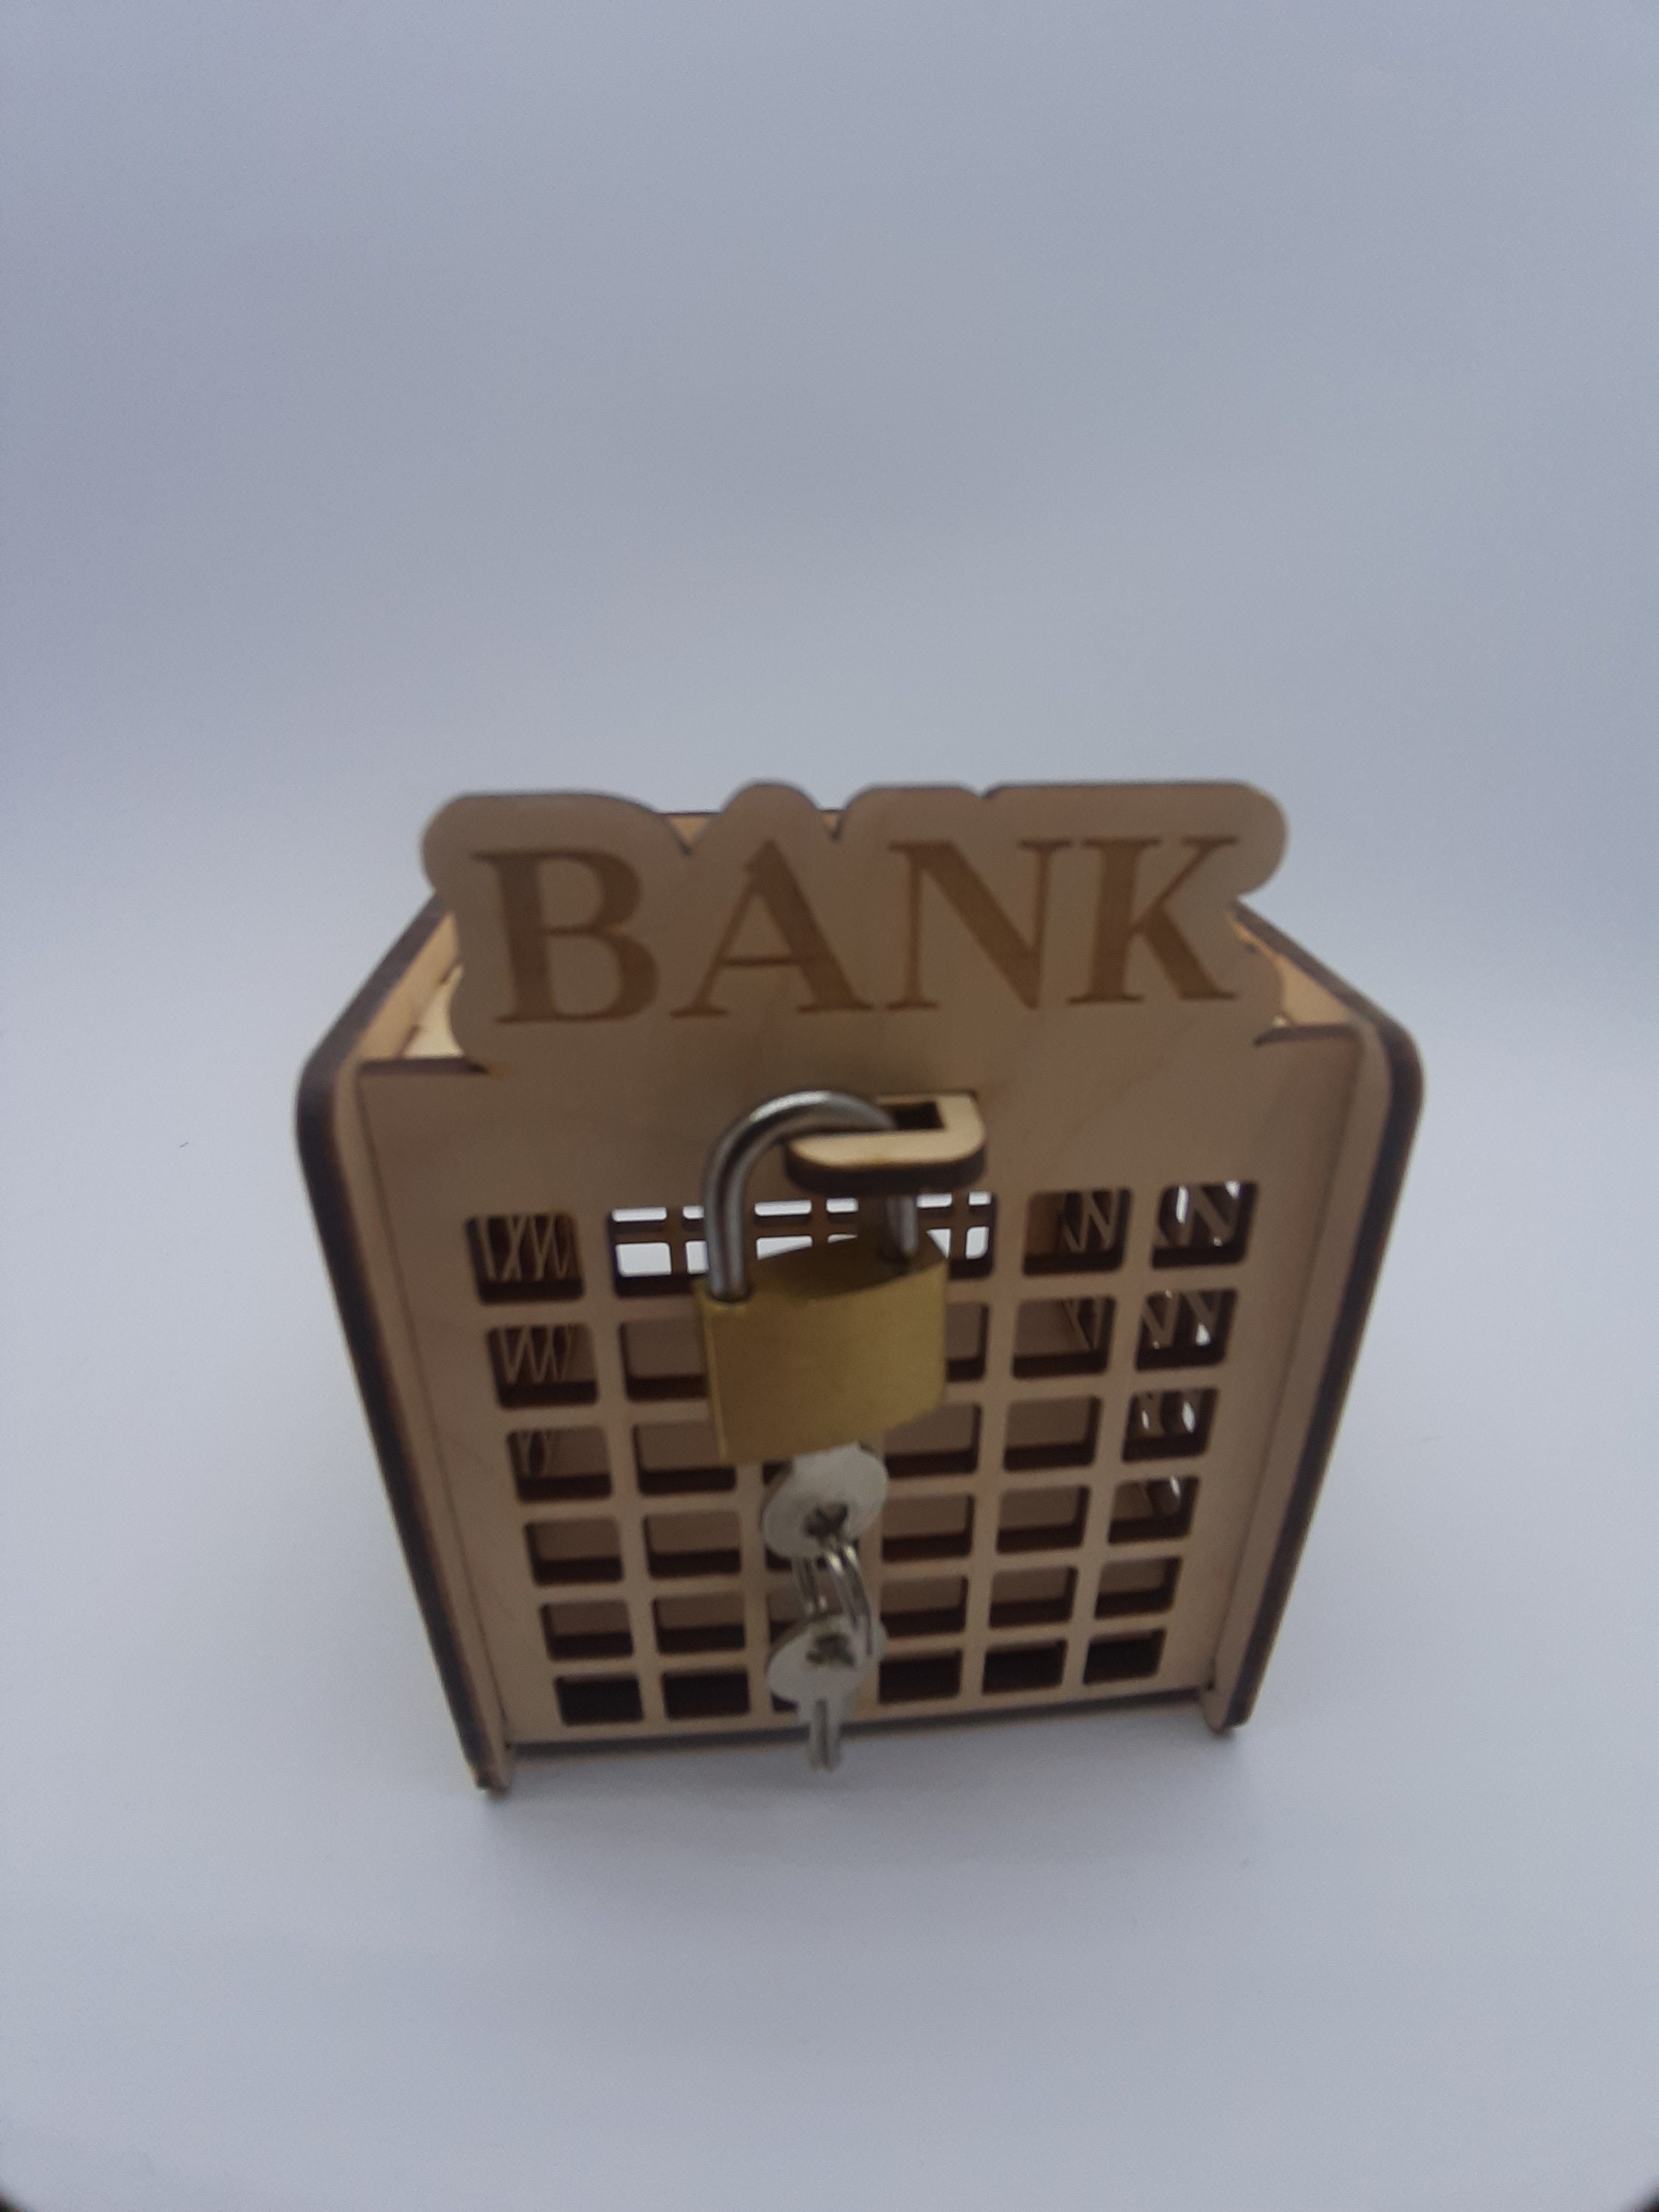 1pc Mechanical Password Money Bank, Mini Safe Box For Coin Saving, Creative  Gift And Christmas Present (blue)